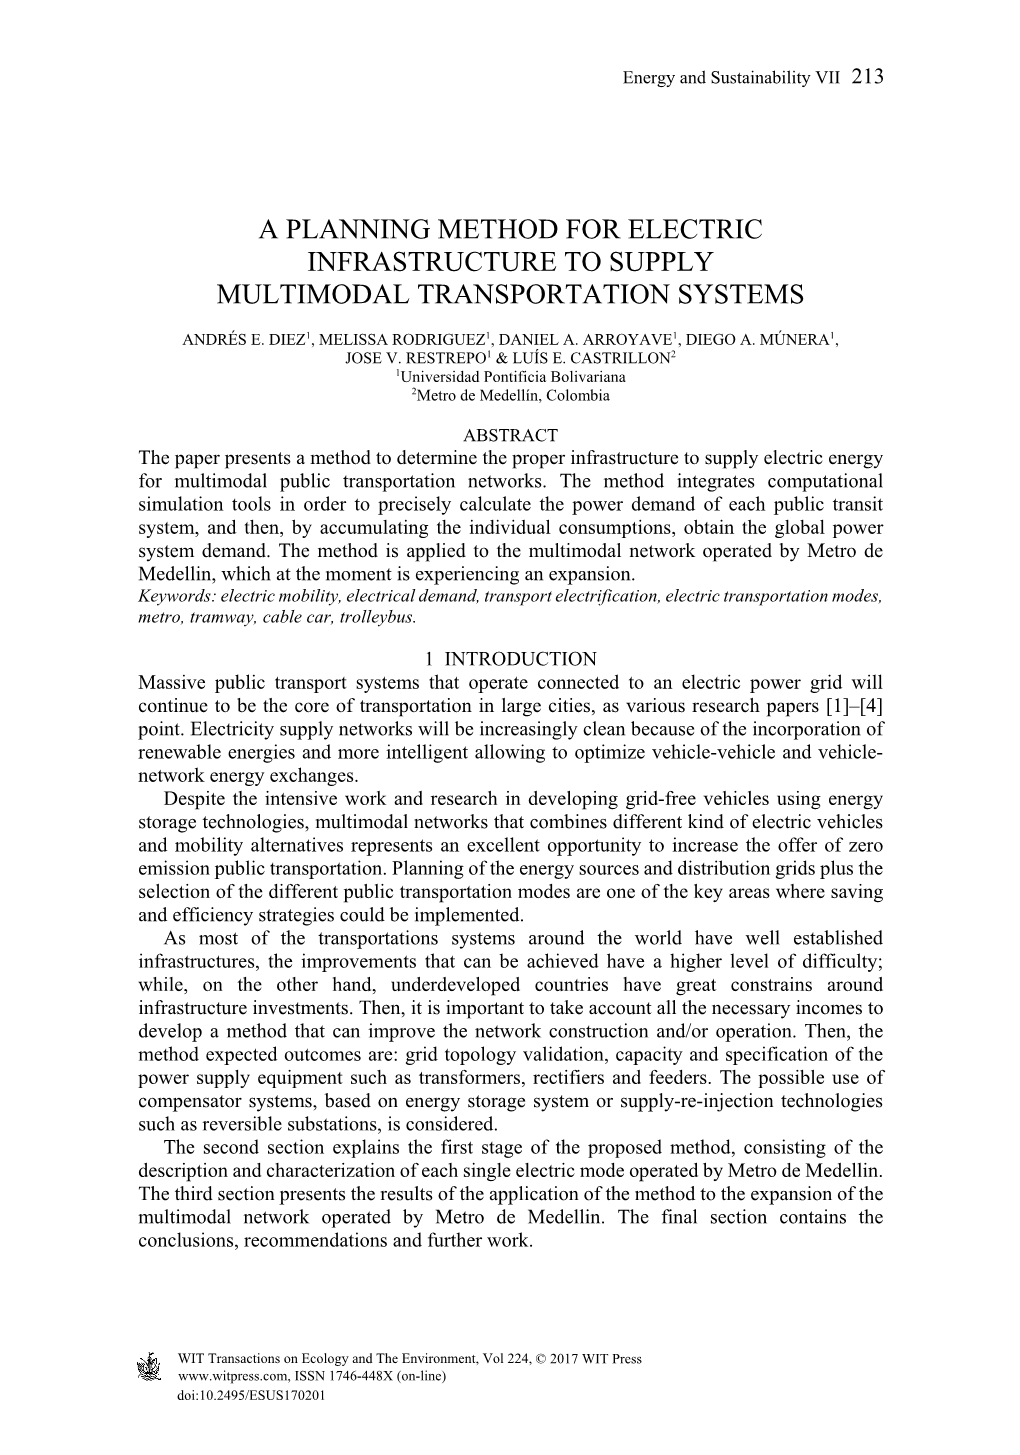 A Planning Method for Electric Infrastructure to Supply Multimodal Transportation Systems